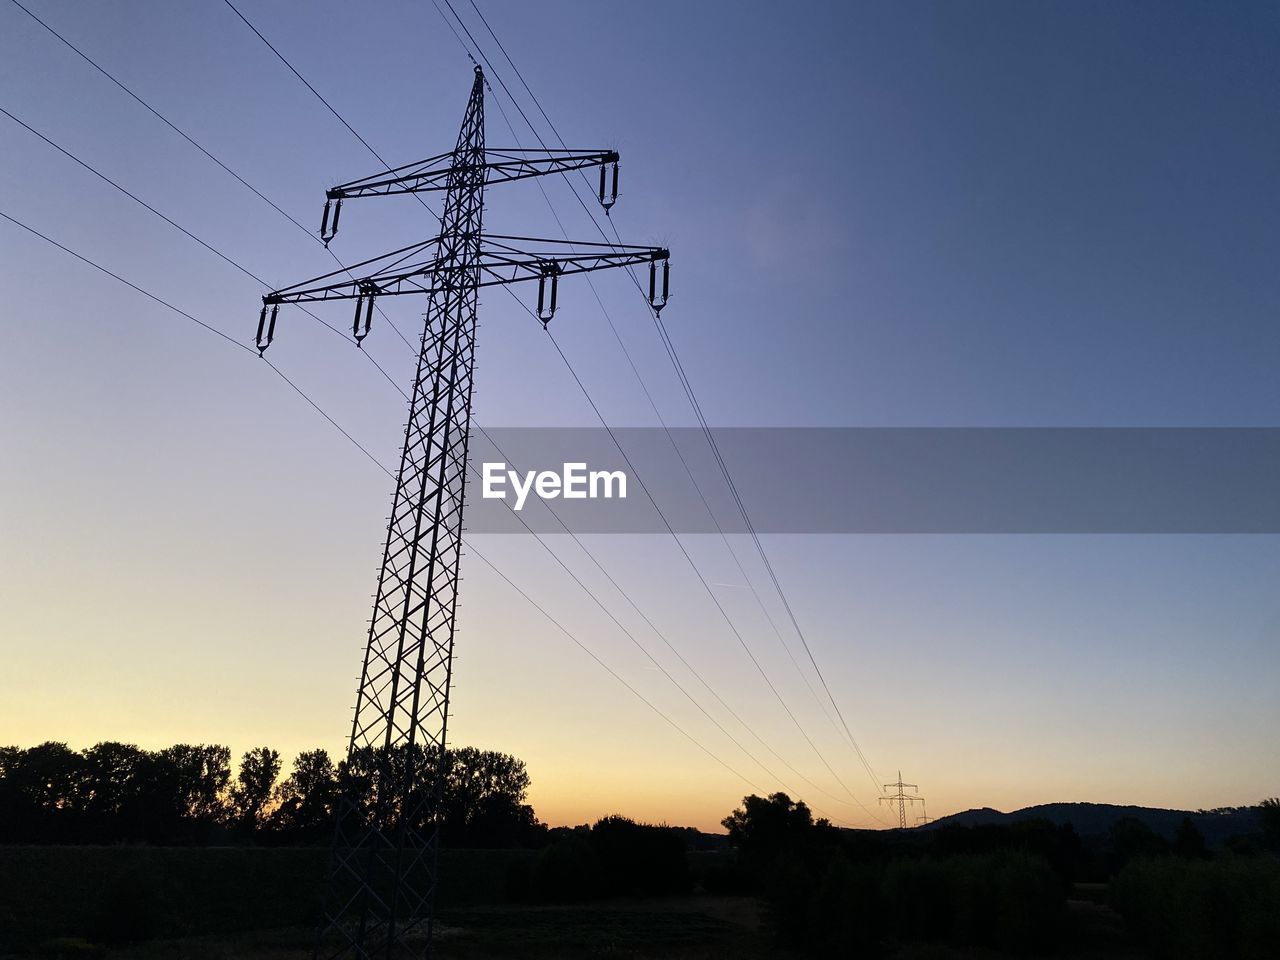 silhouette electricity pylon against clear sky during sunset